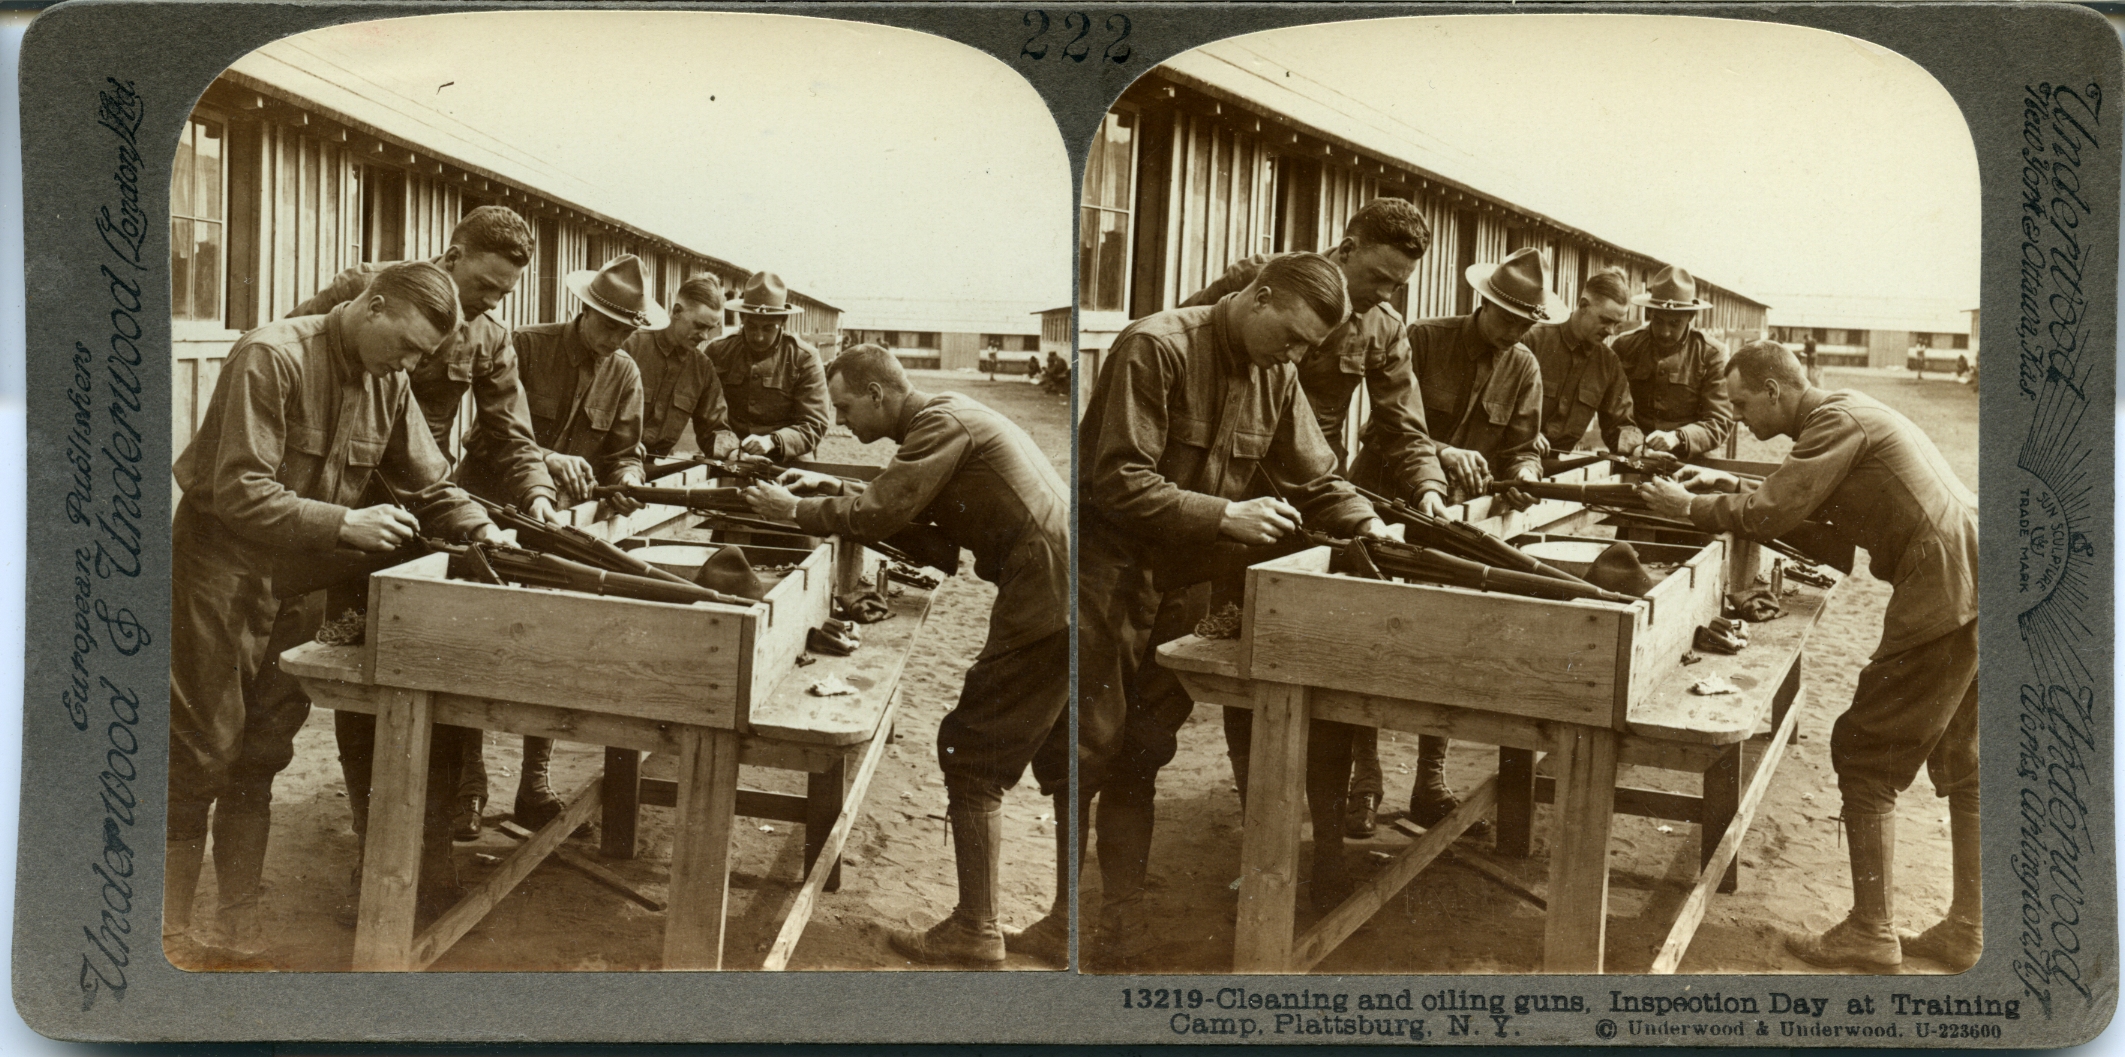 Cleaning and oiling guns. Inspection Day at Training Camp, Plattsburg, N.Y.